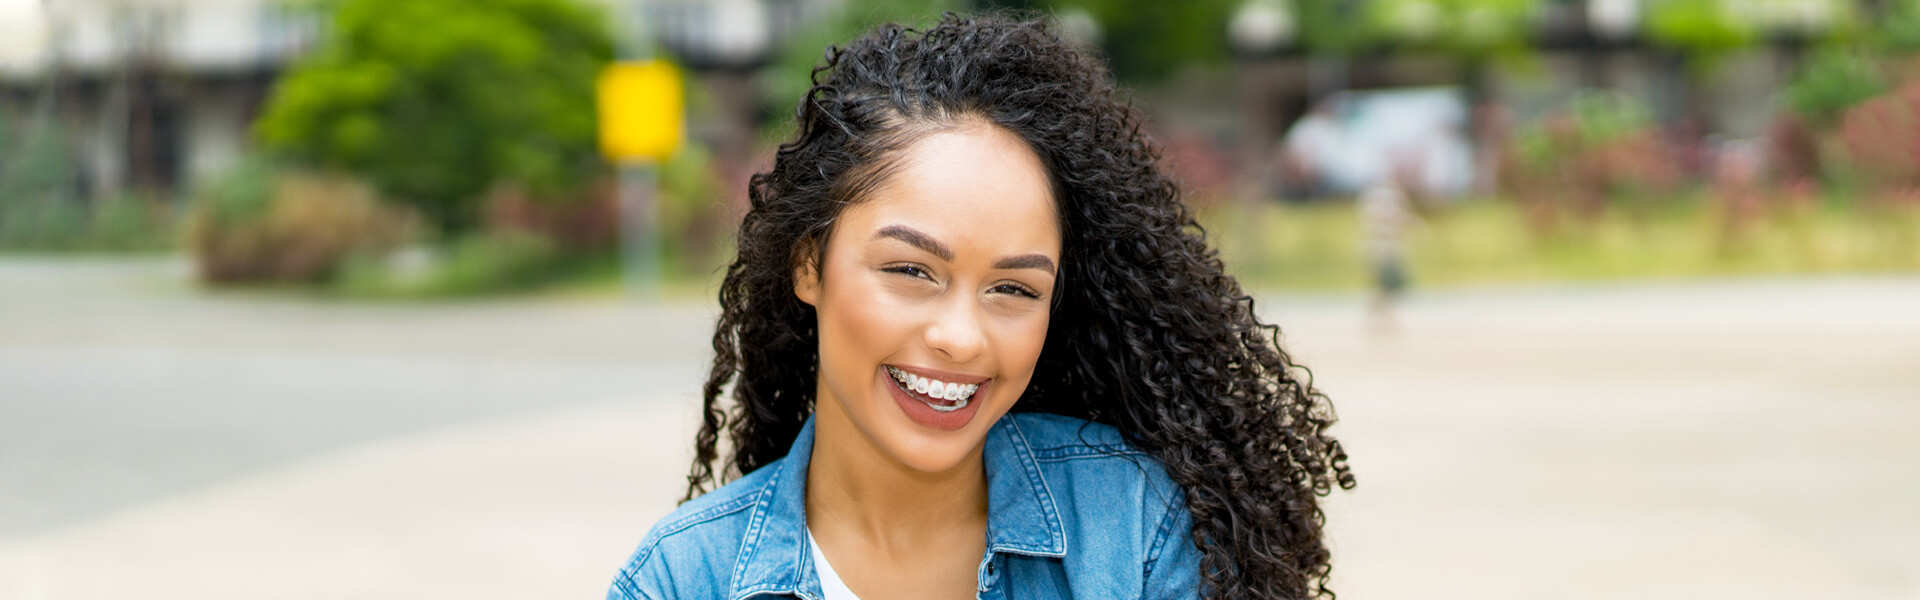 Ceramic Braces Guide: Everything You Need to Know